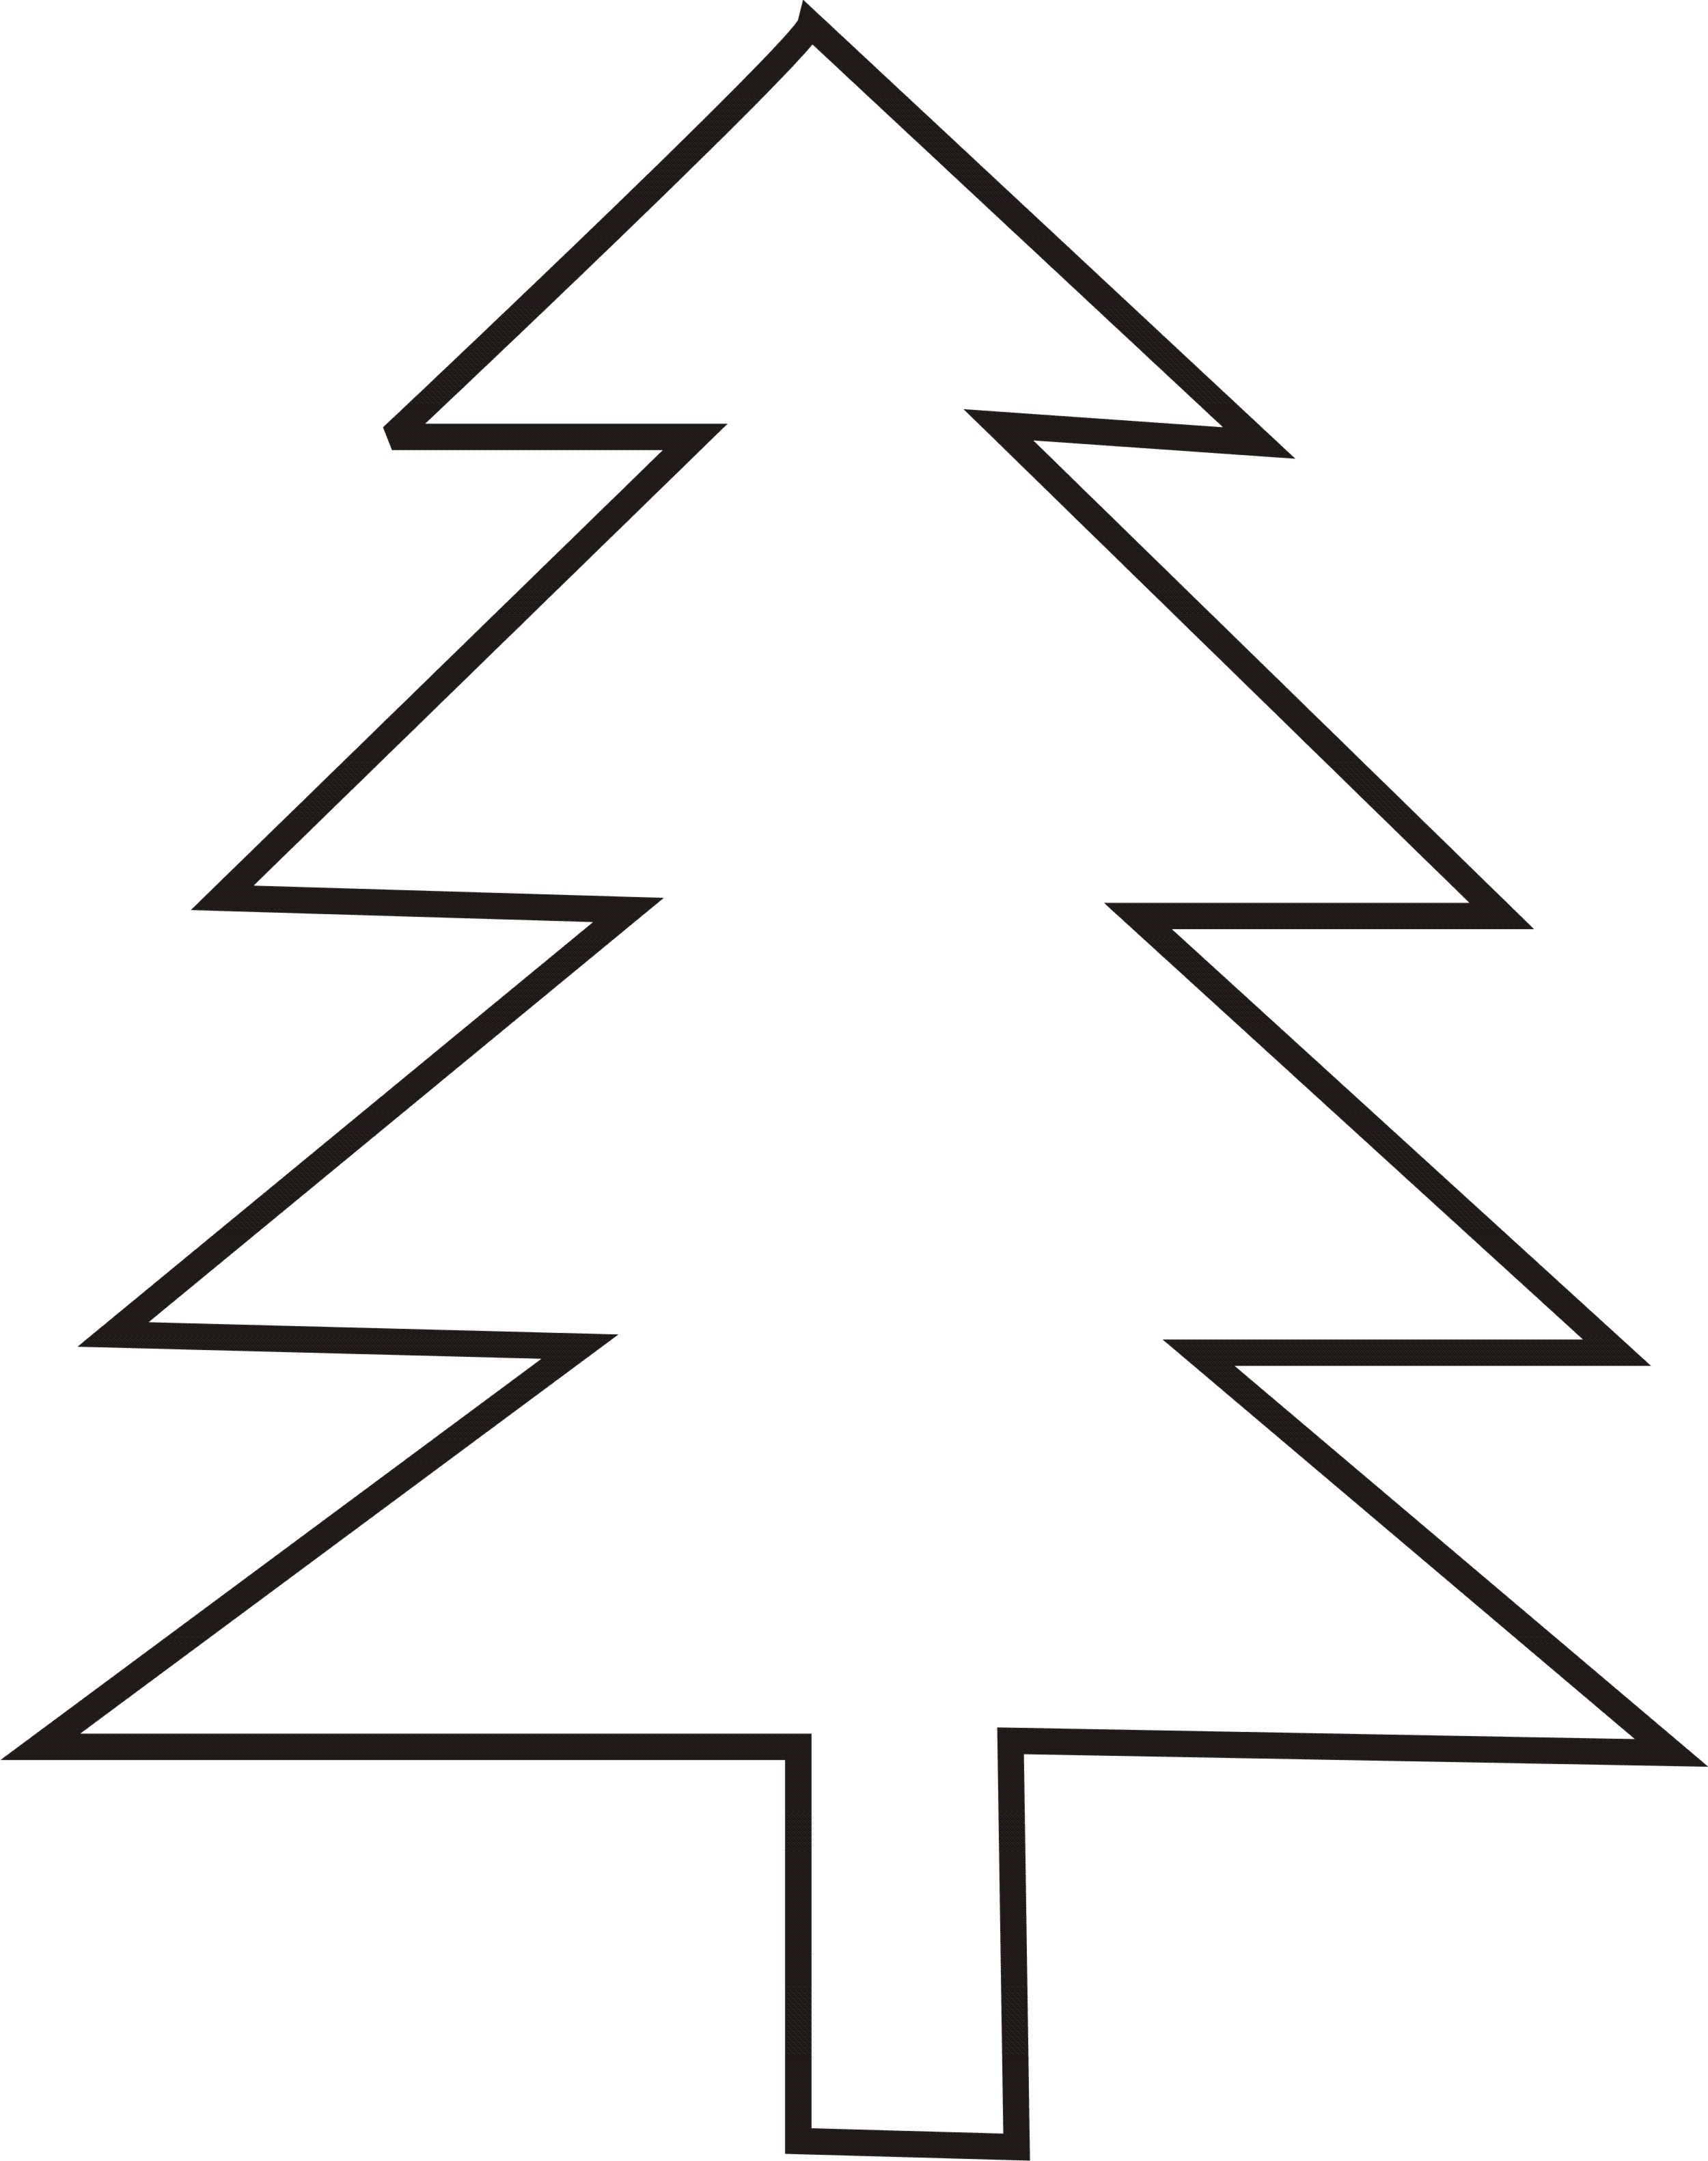 Free Christmas Tree Outlines, Download Free Clip Art, Free Clip Art.